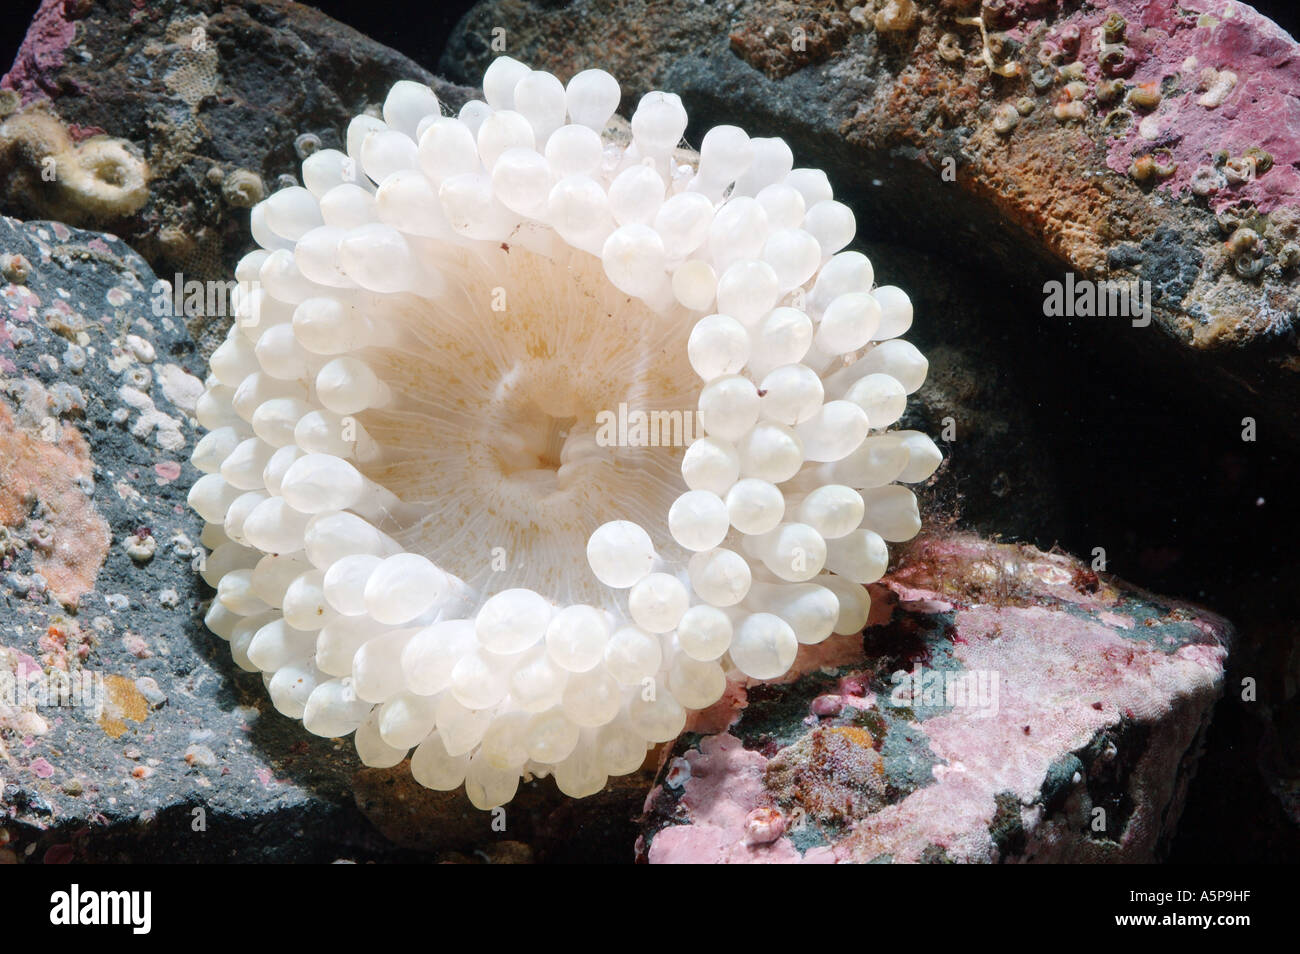 White form of new species of North Pacific sea anemone Cribrinopsis Actiniaria living between the stones disk blunt tentacles Stock Photo